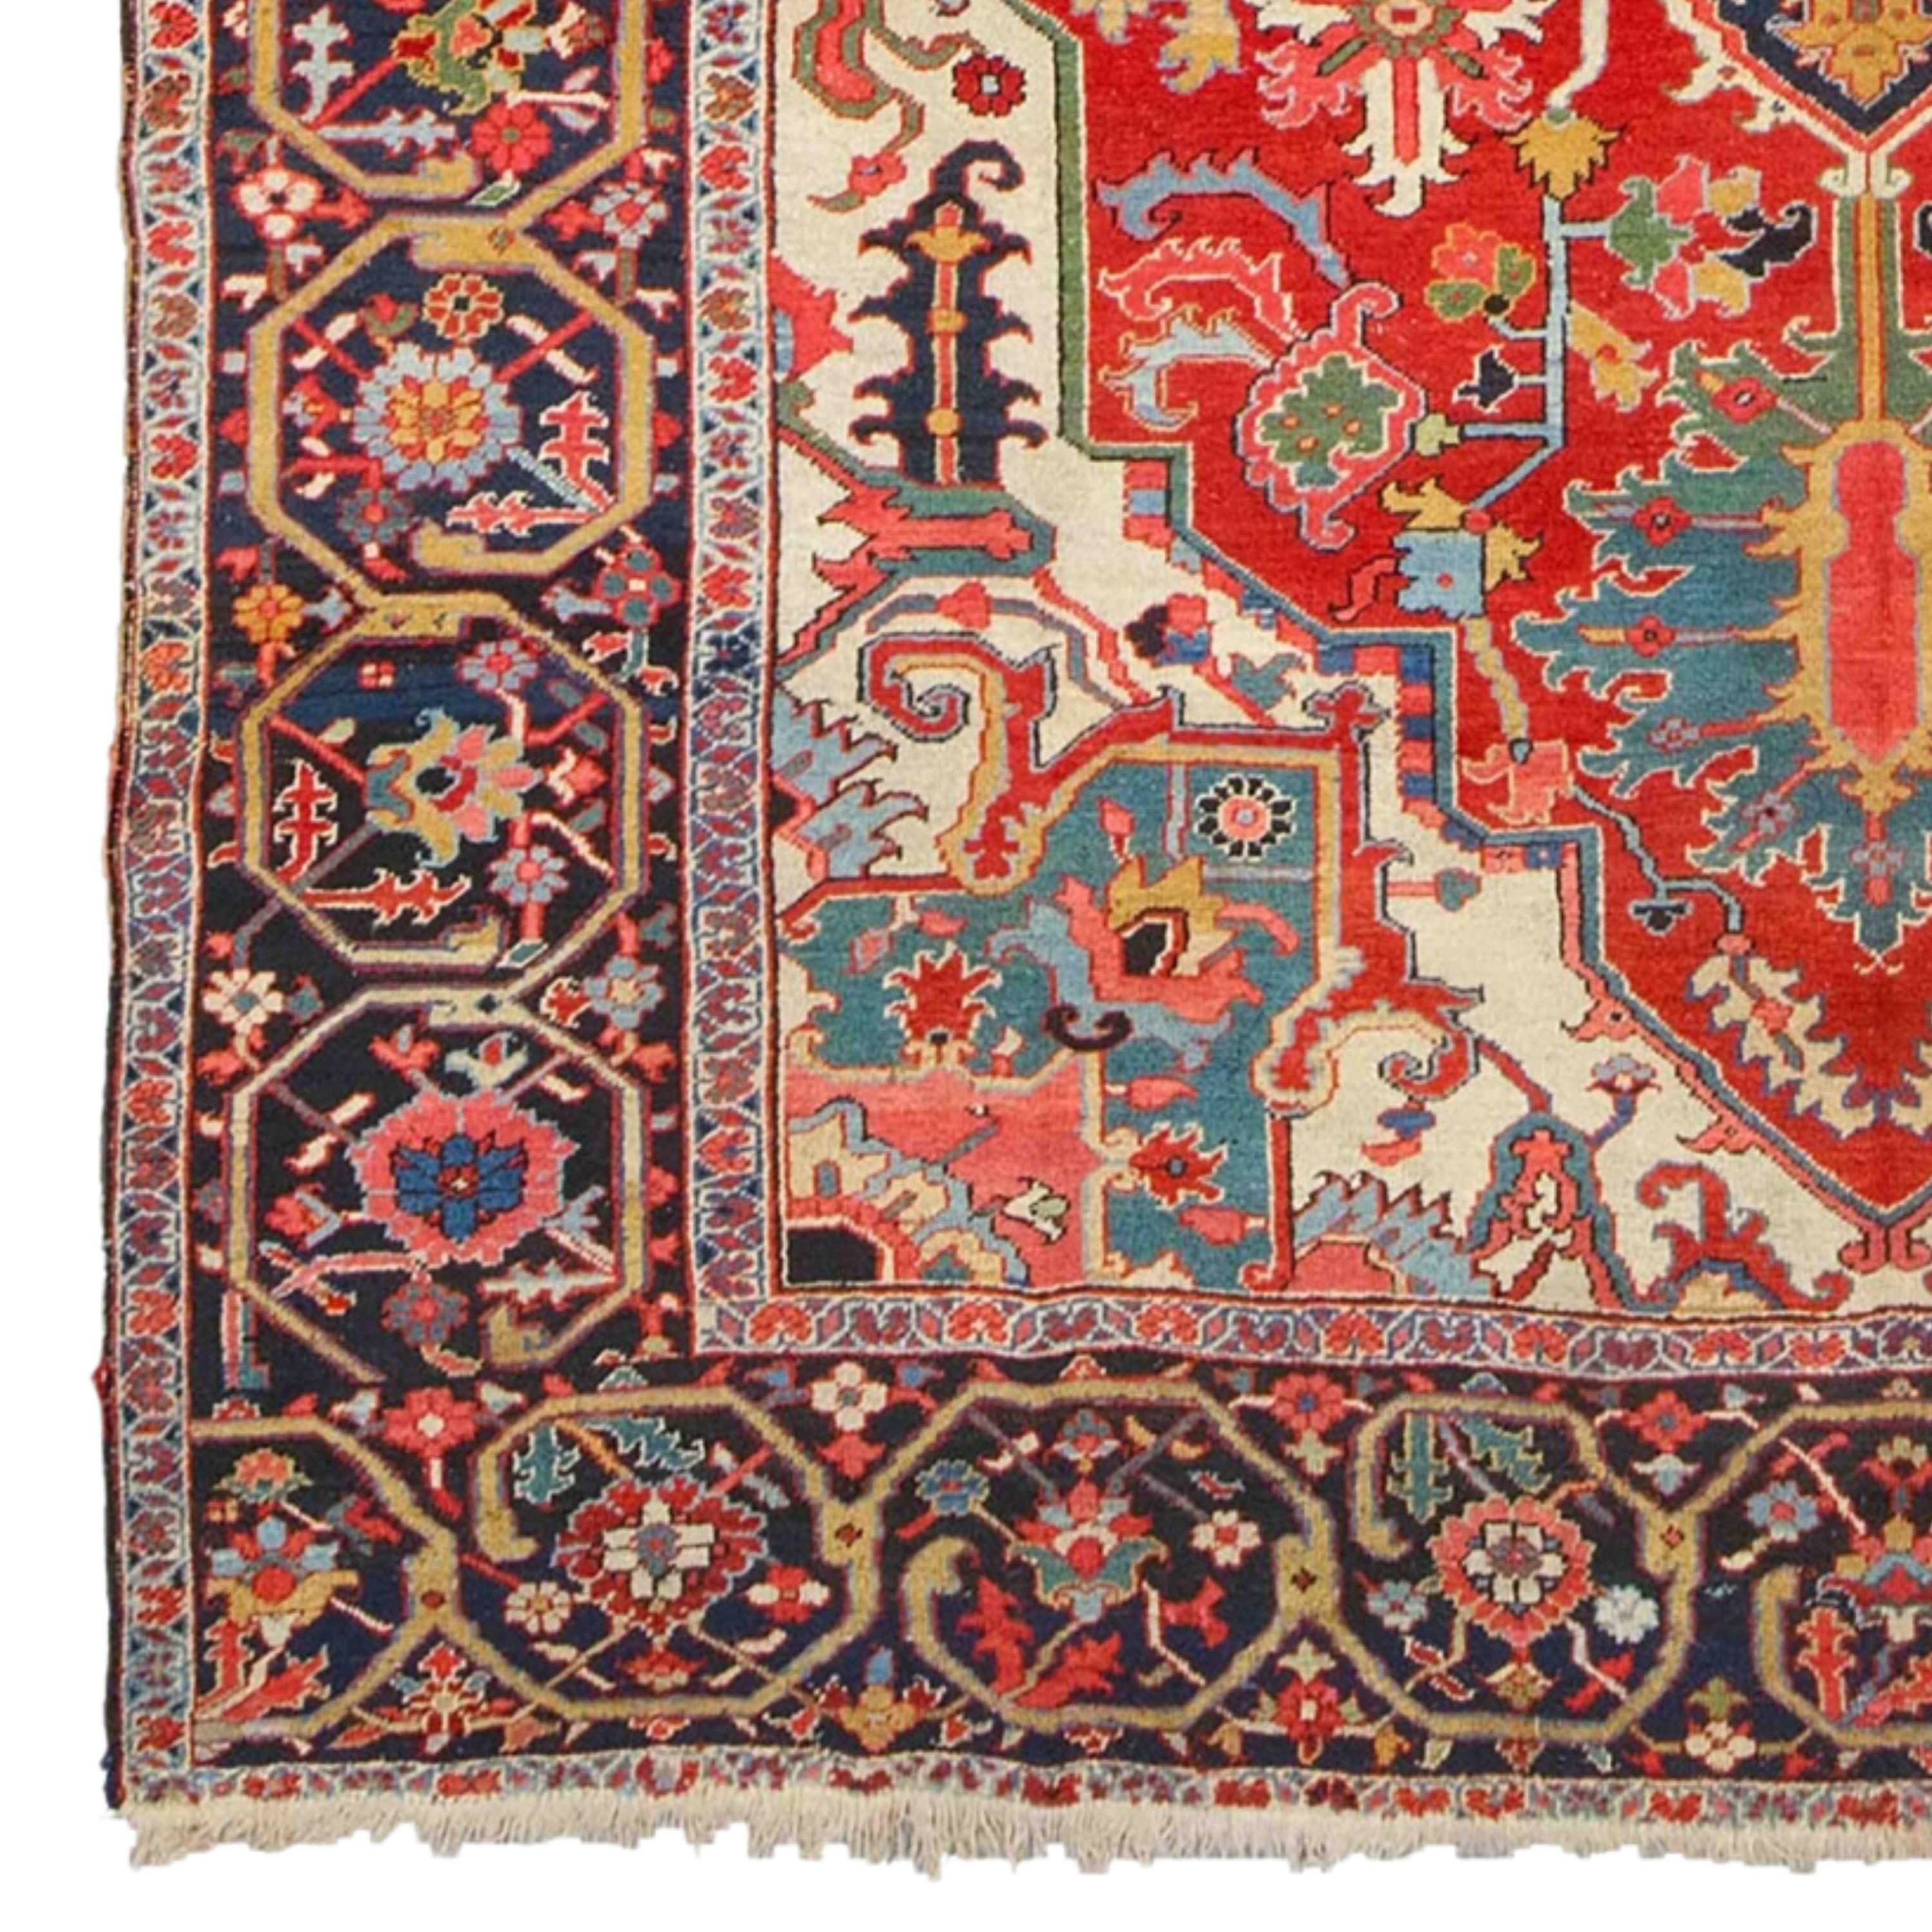 19th Century Serapi Carpet

This magnificent 19th-century antique Serapi carpet is a masterpiece that weaves the history, art and culture of its time into its intricate patterns. Each stitch tells a story, with skilled craftsmen meticulously